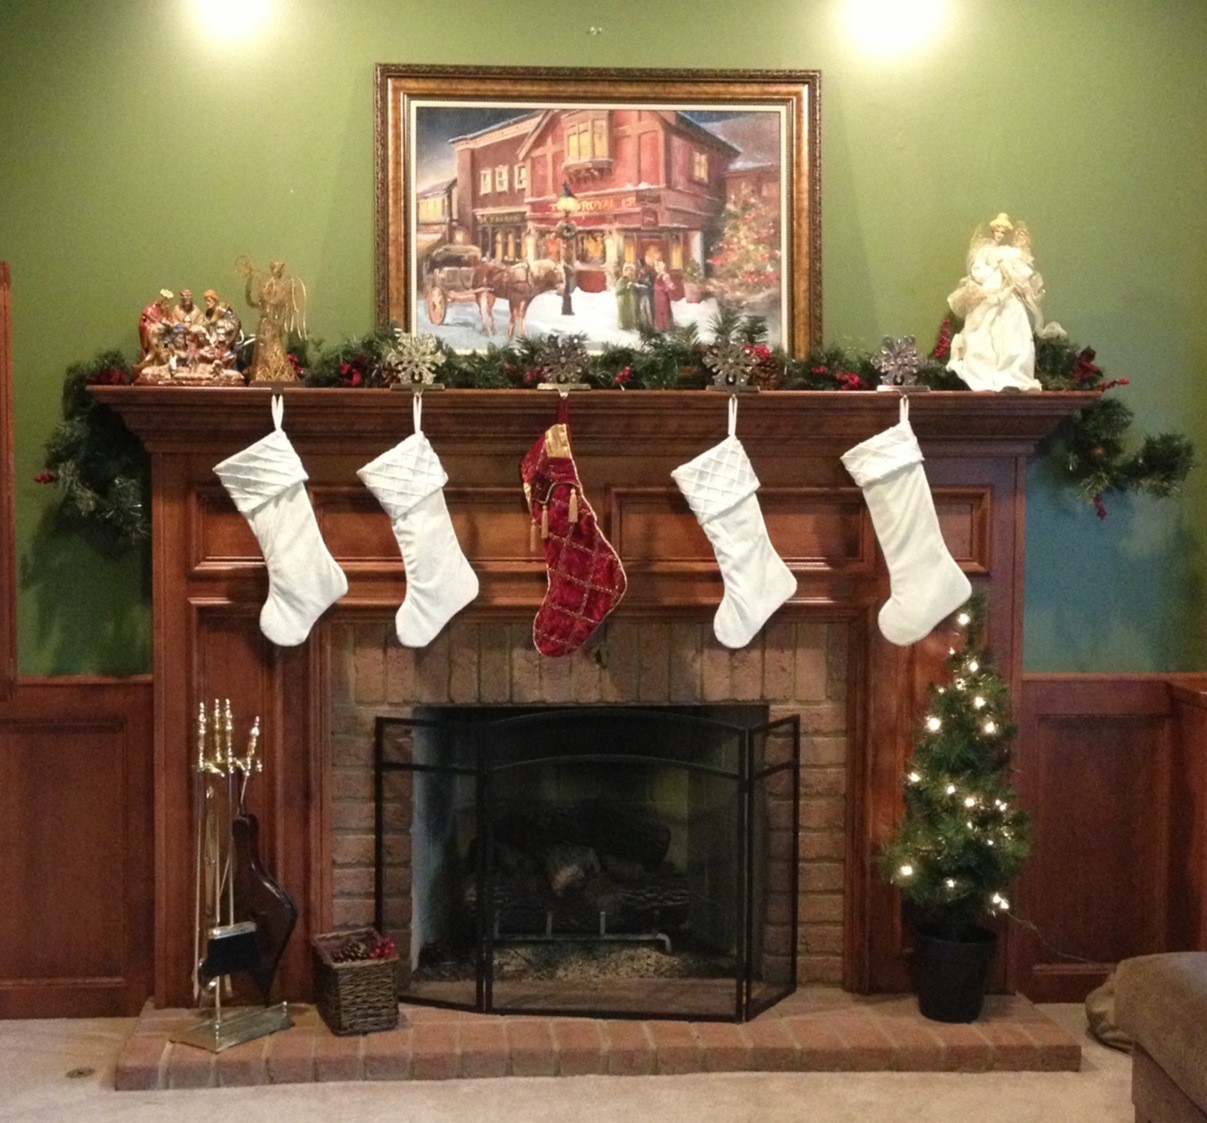 Christmas Fireplace With Stockings